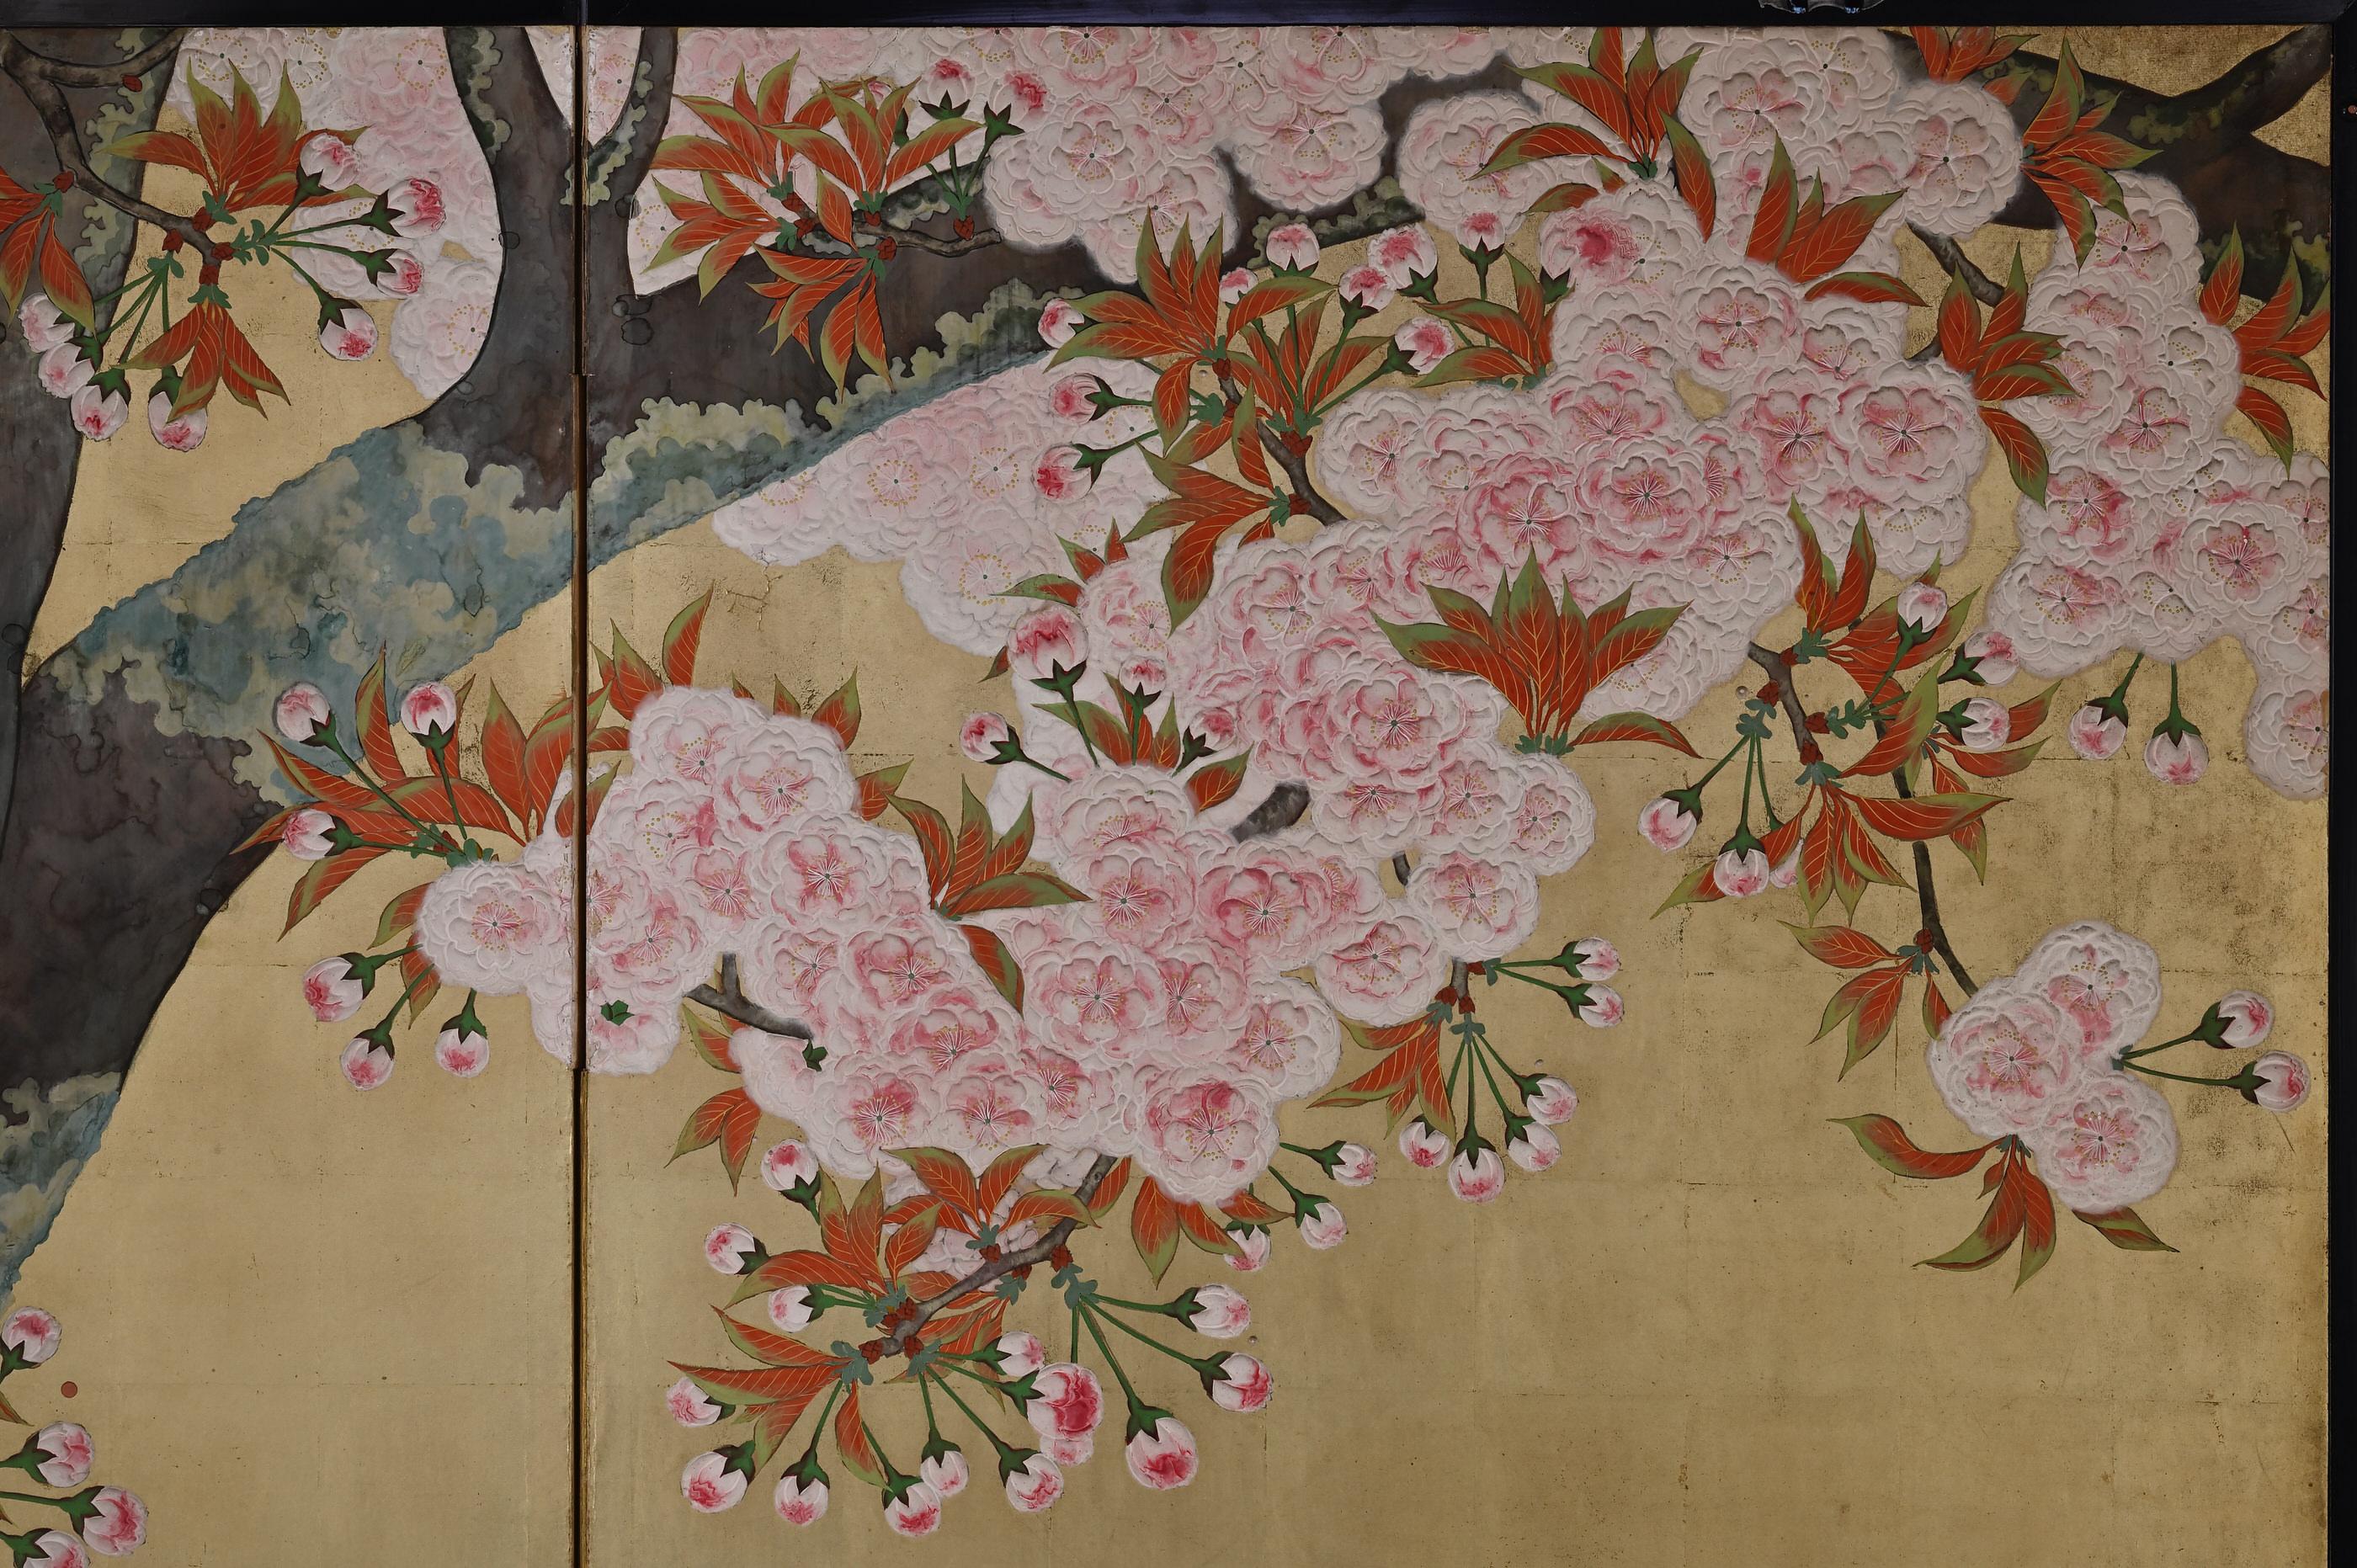 Hand-Painted Early 20th Century Japanese Cherry Blossom Screen by Kano Sanrakuki For Sale